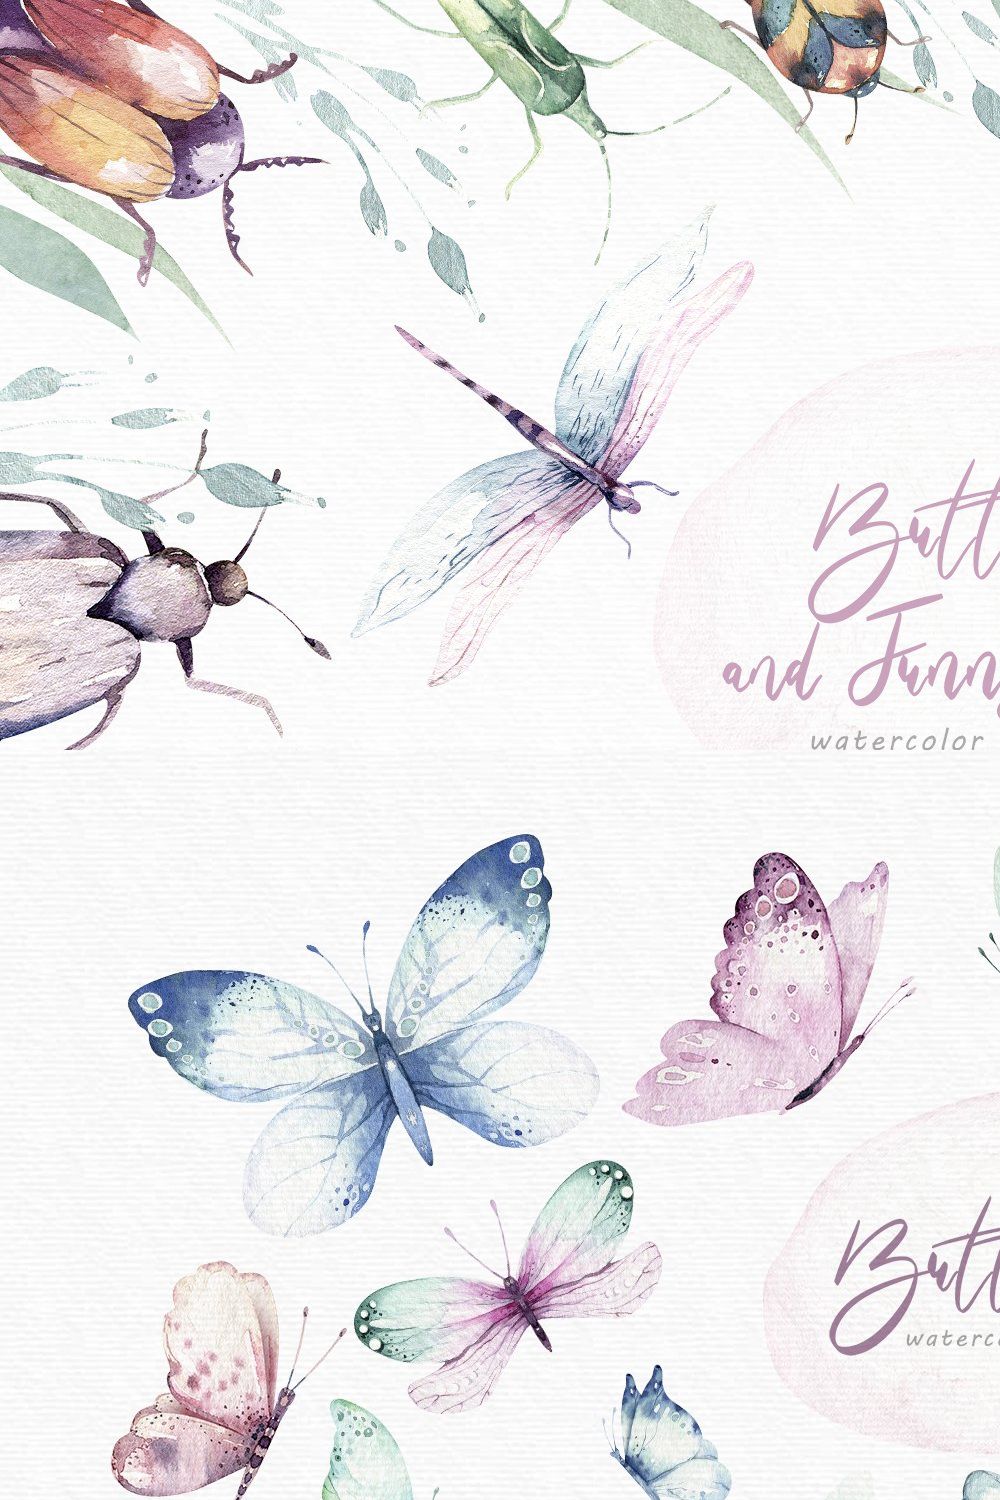 Butterflies and funny bugs set pinterest preview image.